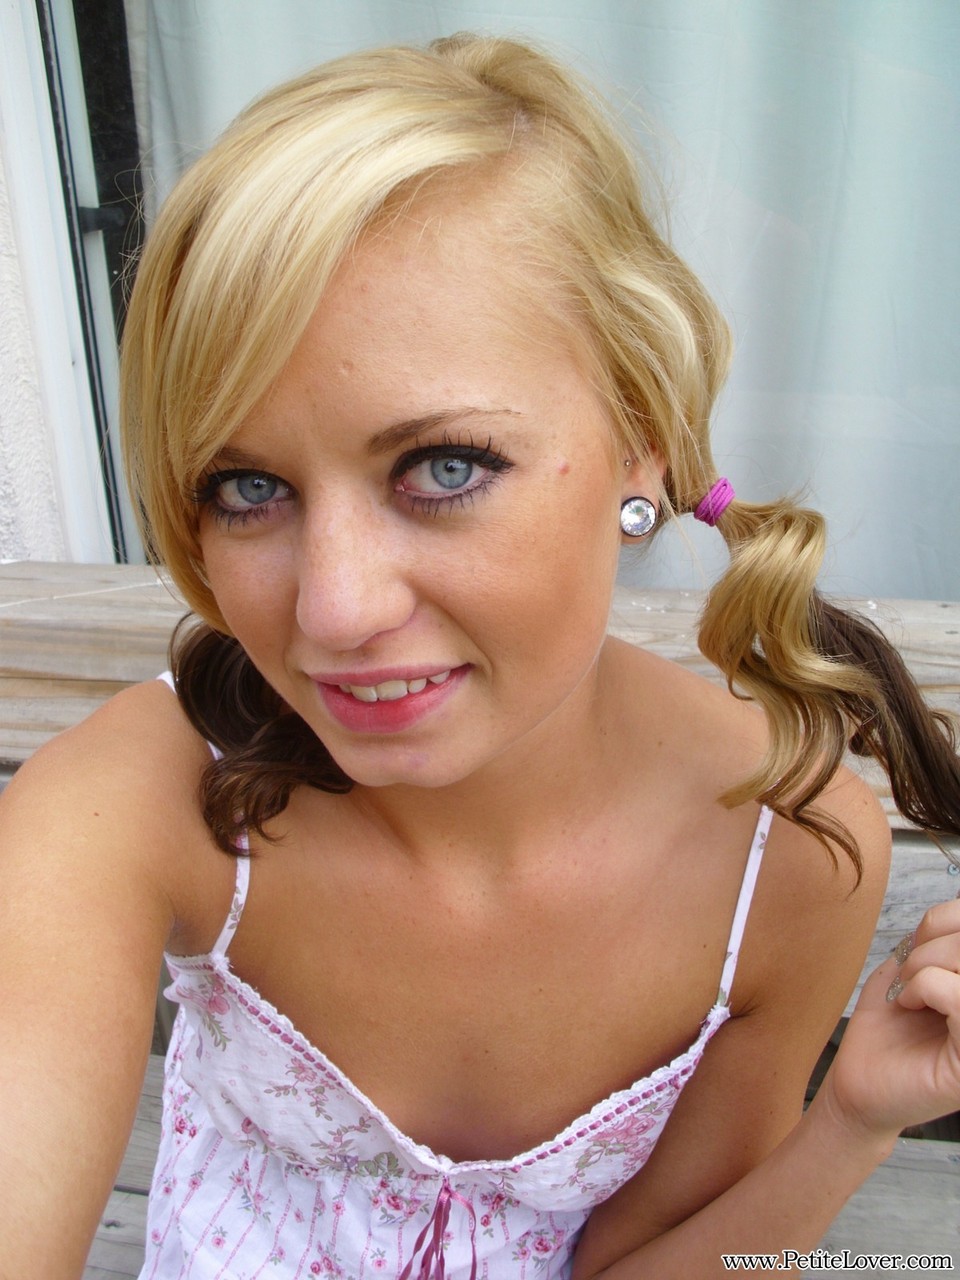 Cute blonde Tiff in pigtails showing off her wee small tits & tiny bald pussy ポルノ写真 #428478629 | Petite Lover Pics, Tiff, Amateur, モバイルポルノ